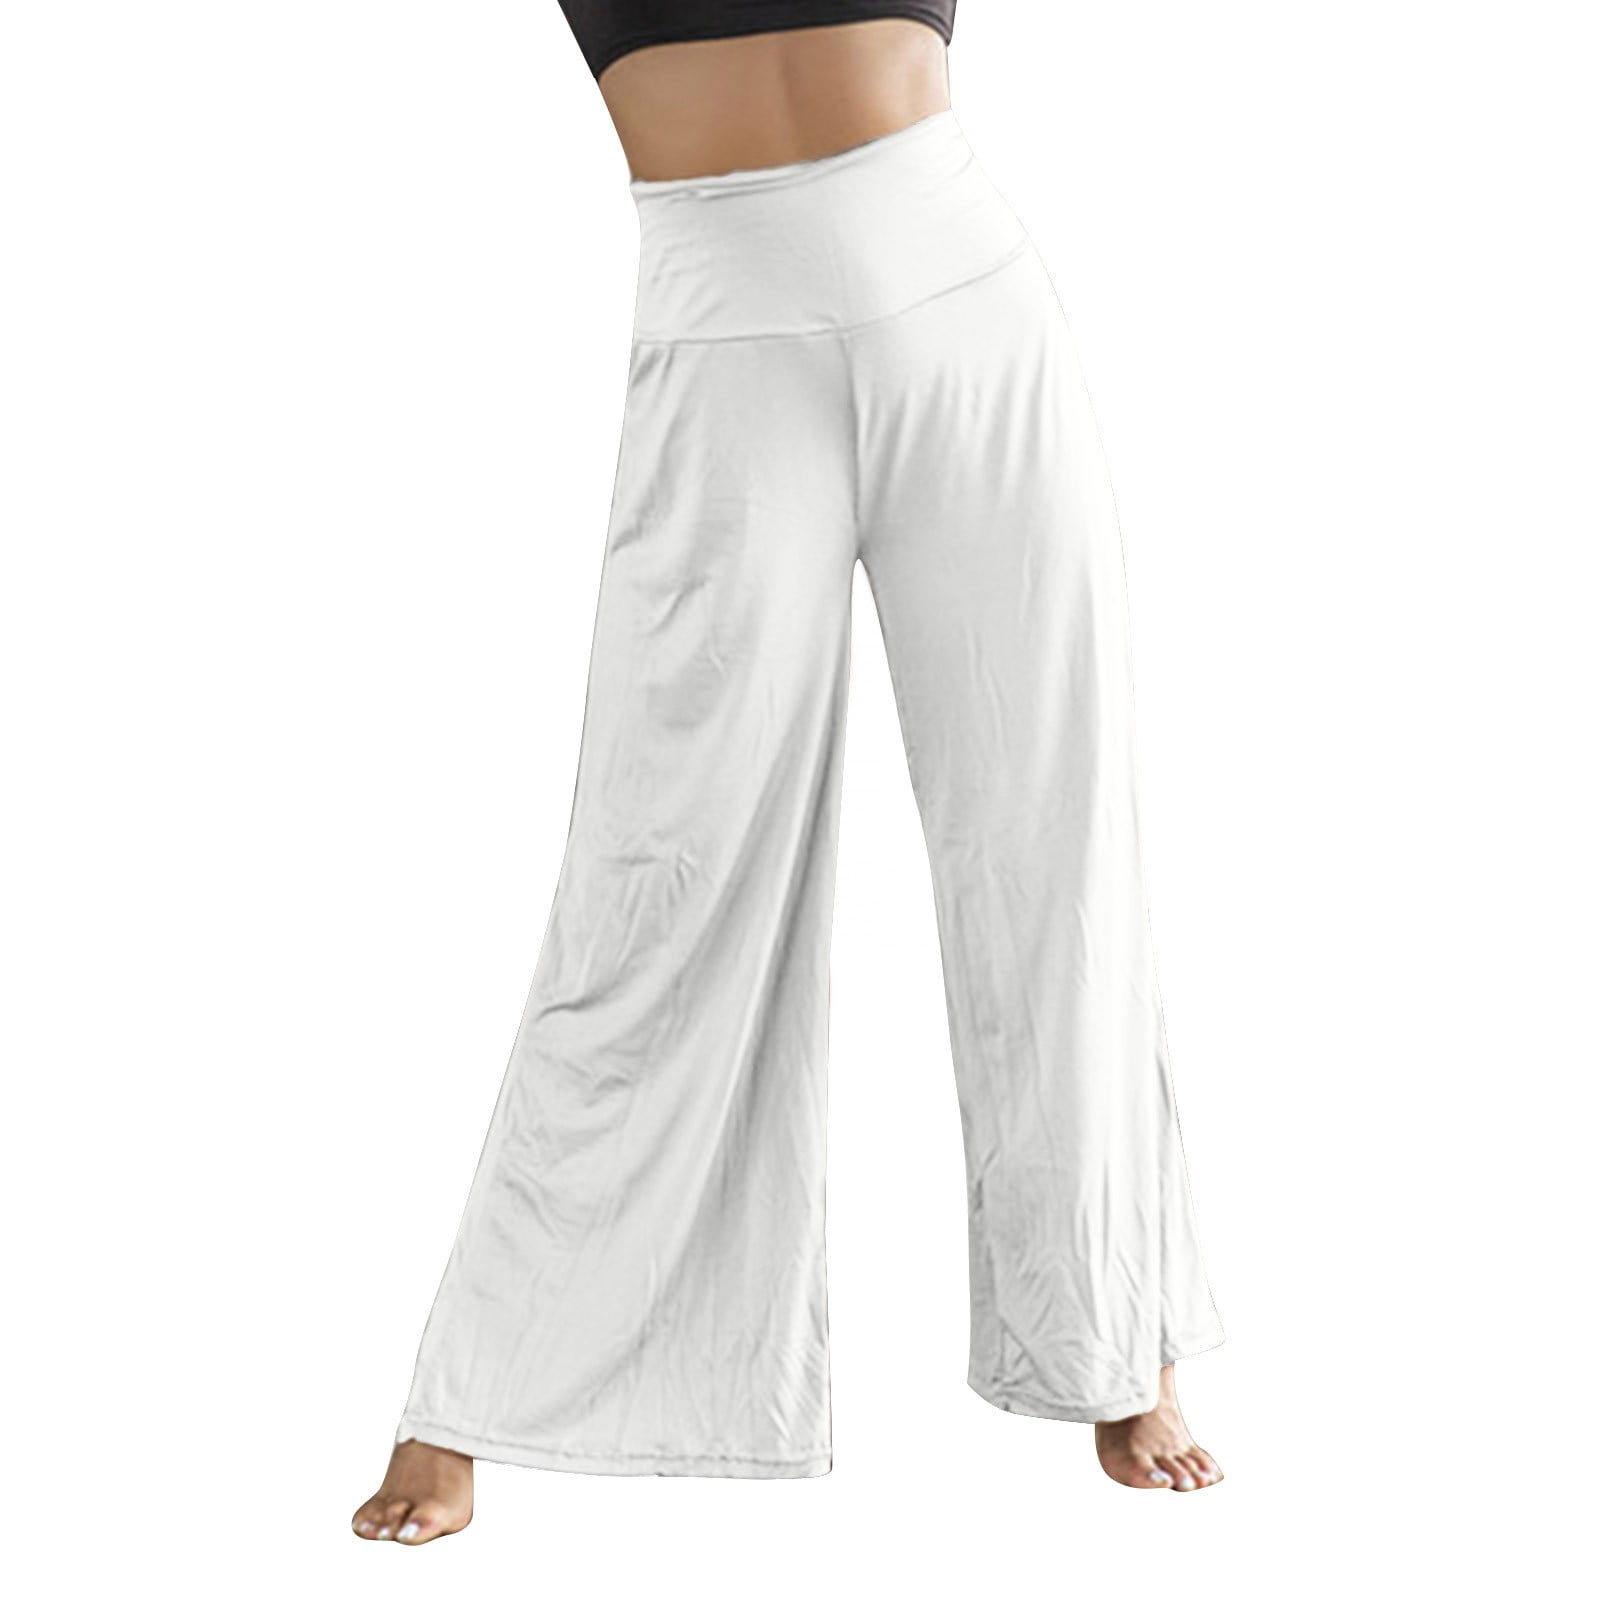 2DXuixsh Plus Size Yoga Pants for Women 3X Lift Womens Casual High Waist  Loose Solid Color Comfy Stretch Yoga Wide Leg Pants Plus Size Yoga Pants  Leggings Polyester White Xxl 